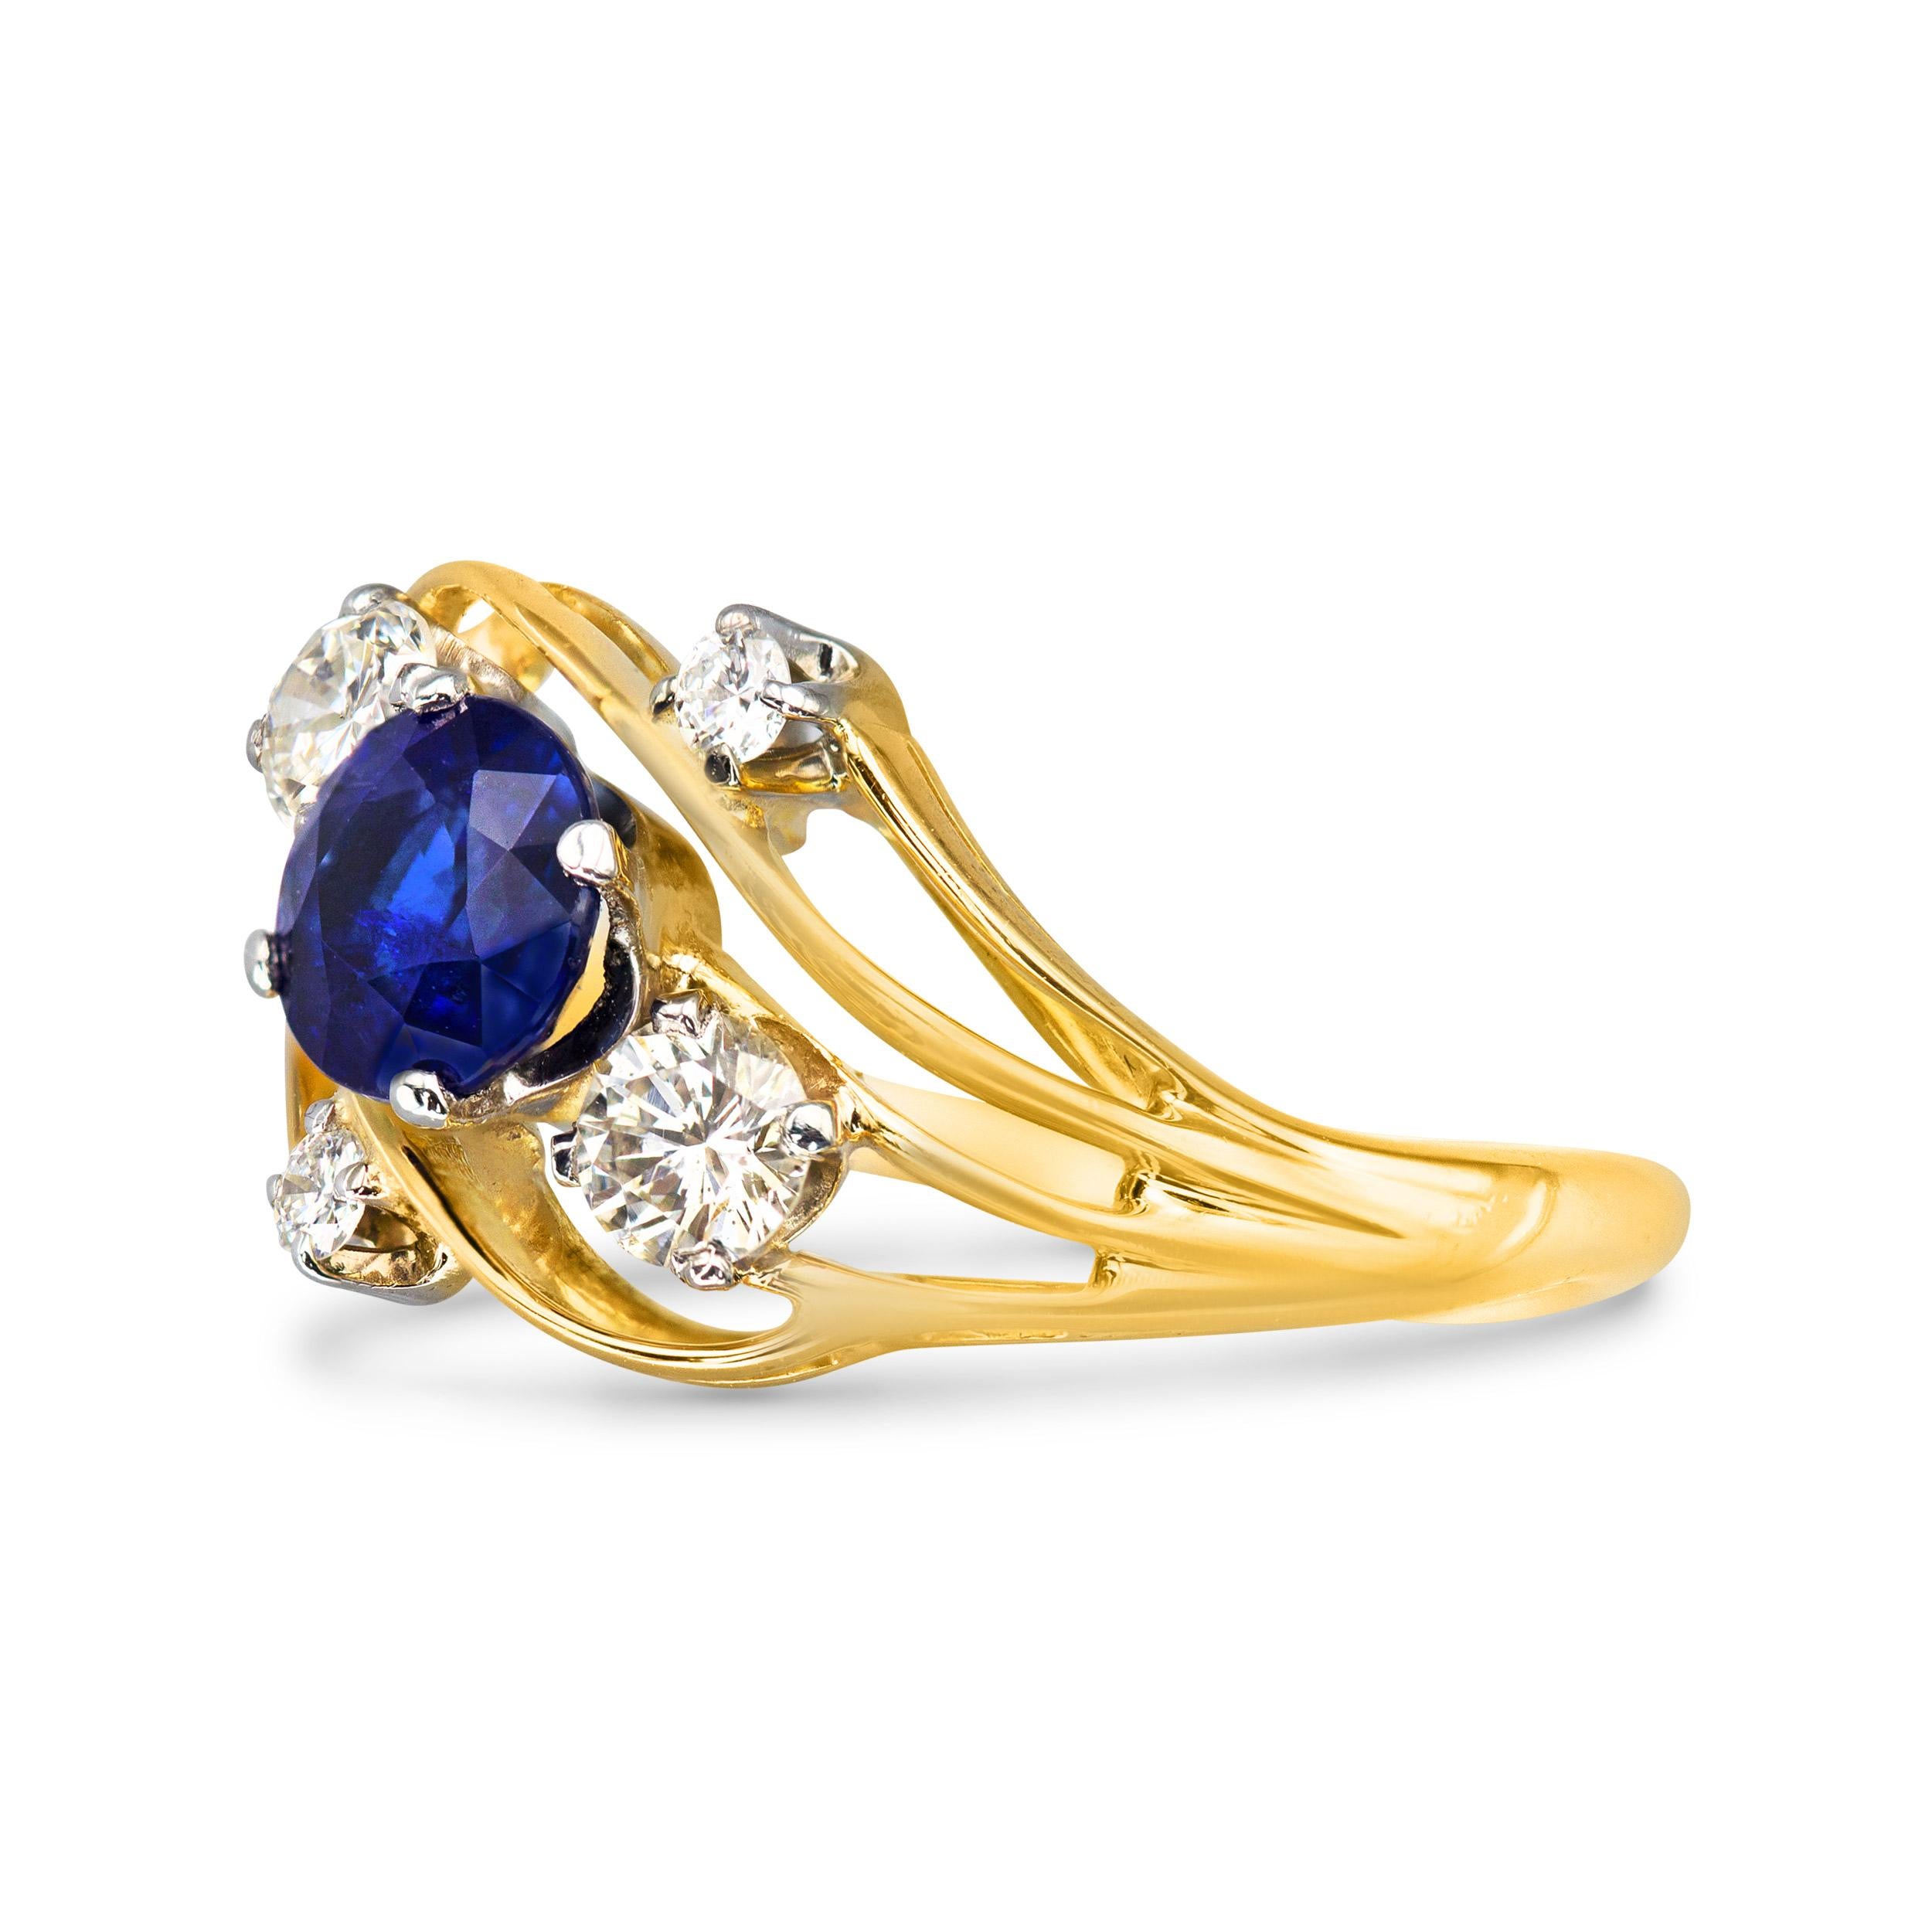 Blue, white, and yellow gold... just a few of my favorite things. This vintage number is the perfect ring to add to your everyday stack. The center 0.97 carat sapphire is complemented by four sweet little single-cut diamonds. An all-around fun and